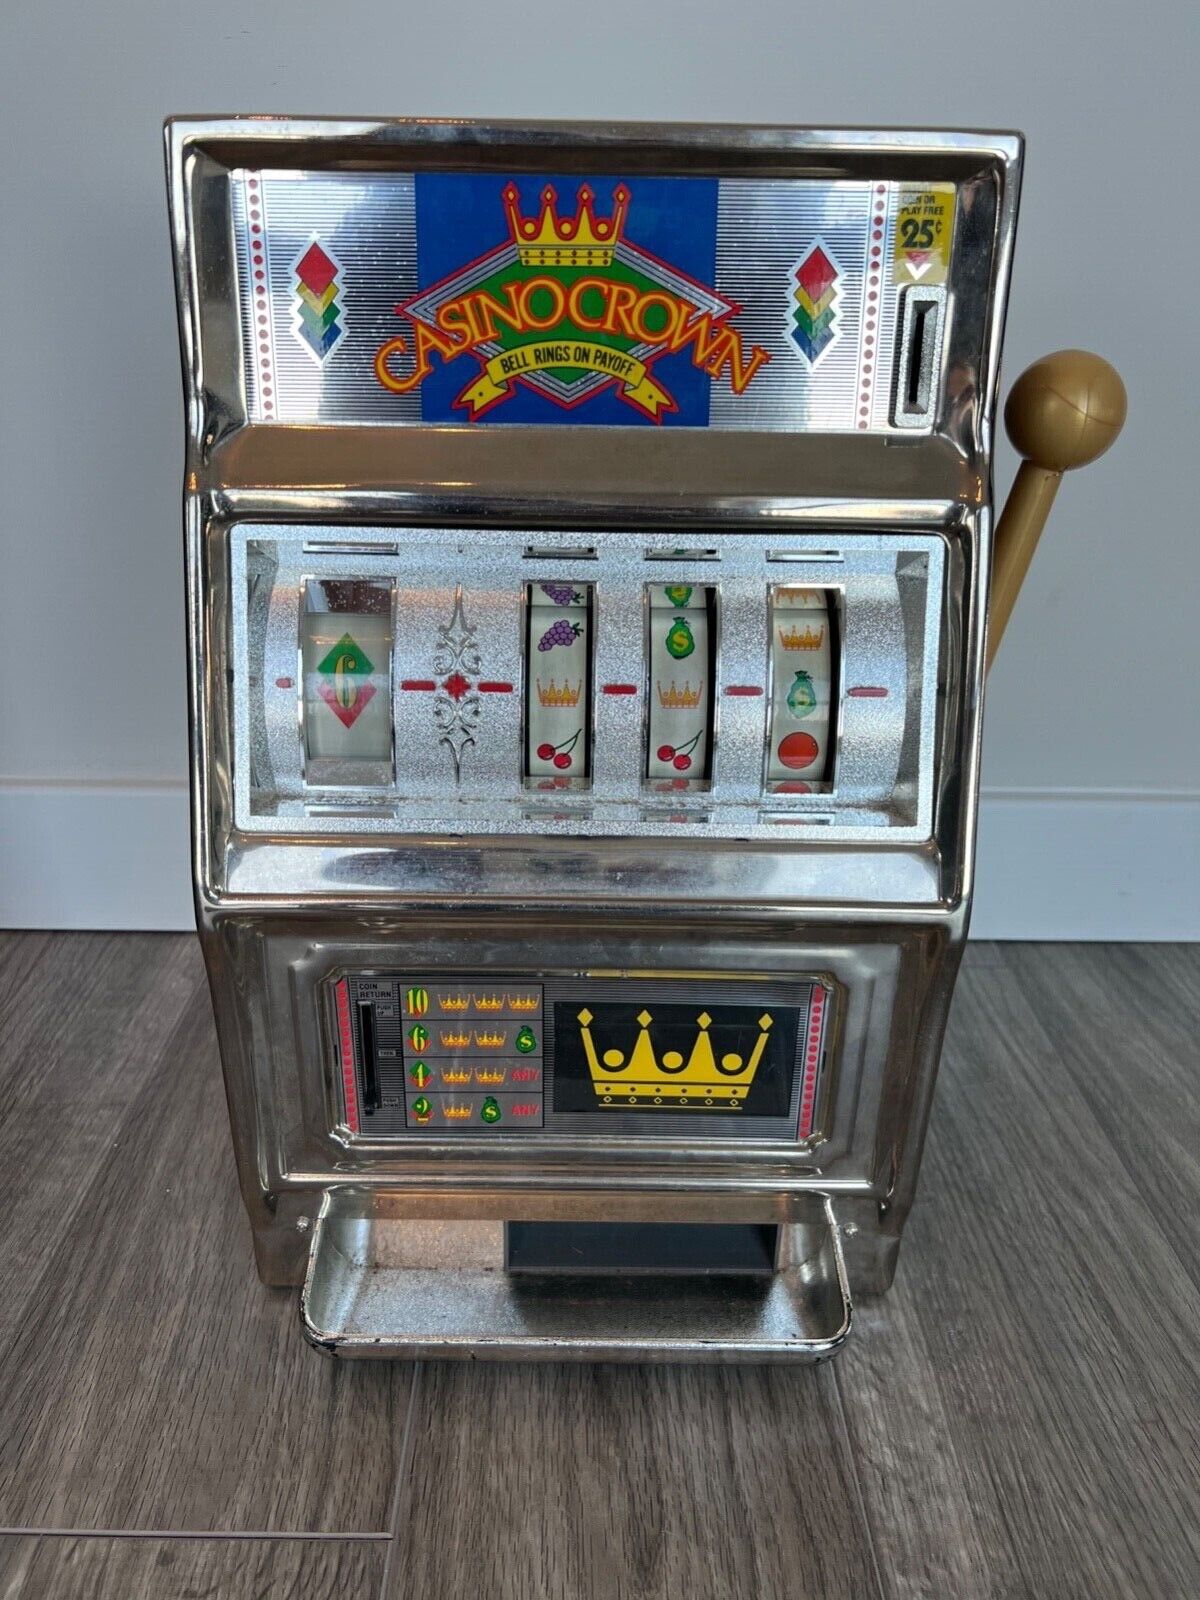 Vintage Waco Casino Crown Novelty Game Slot Machine Bank 25¢ Working Condition